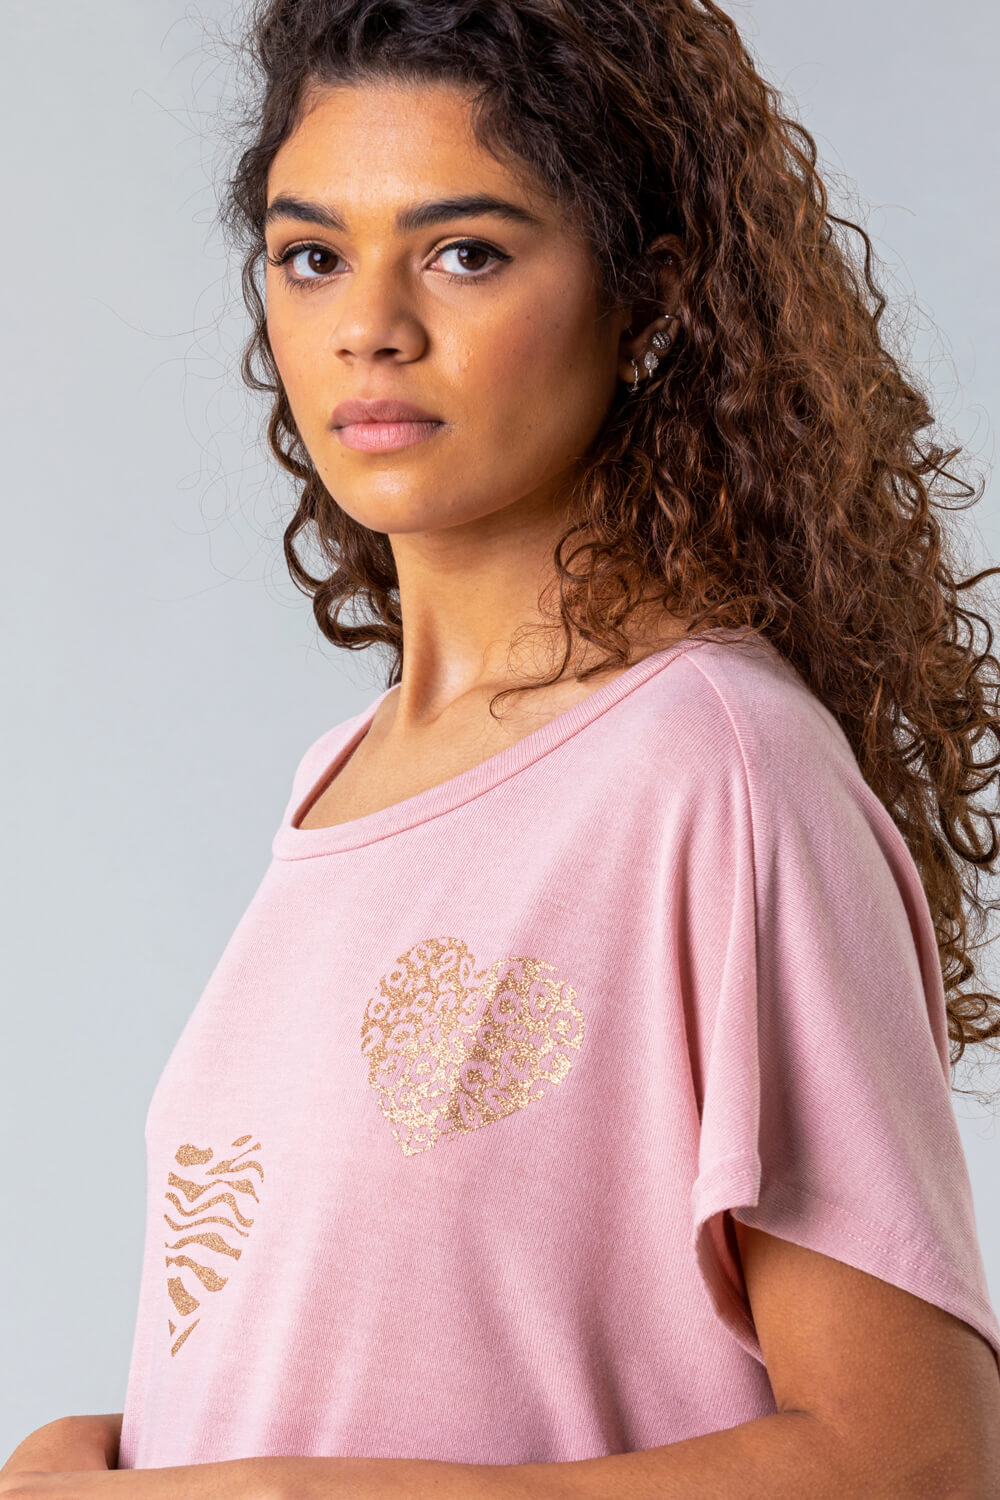 PINK Foil Heart Print Lounge T-Shirt, Image 4 of 4